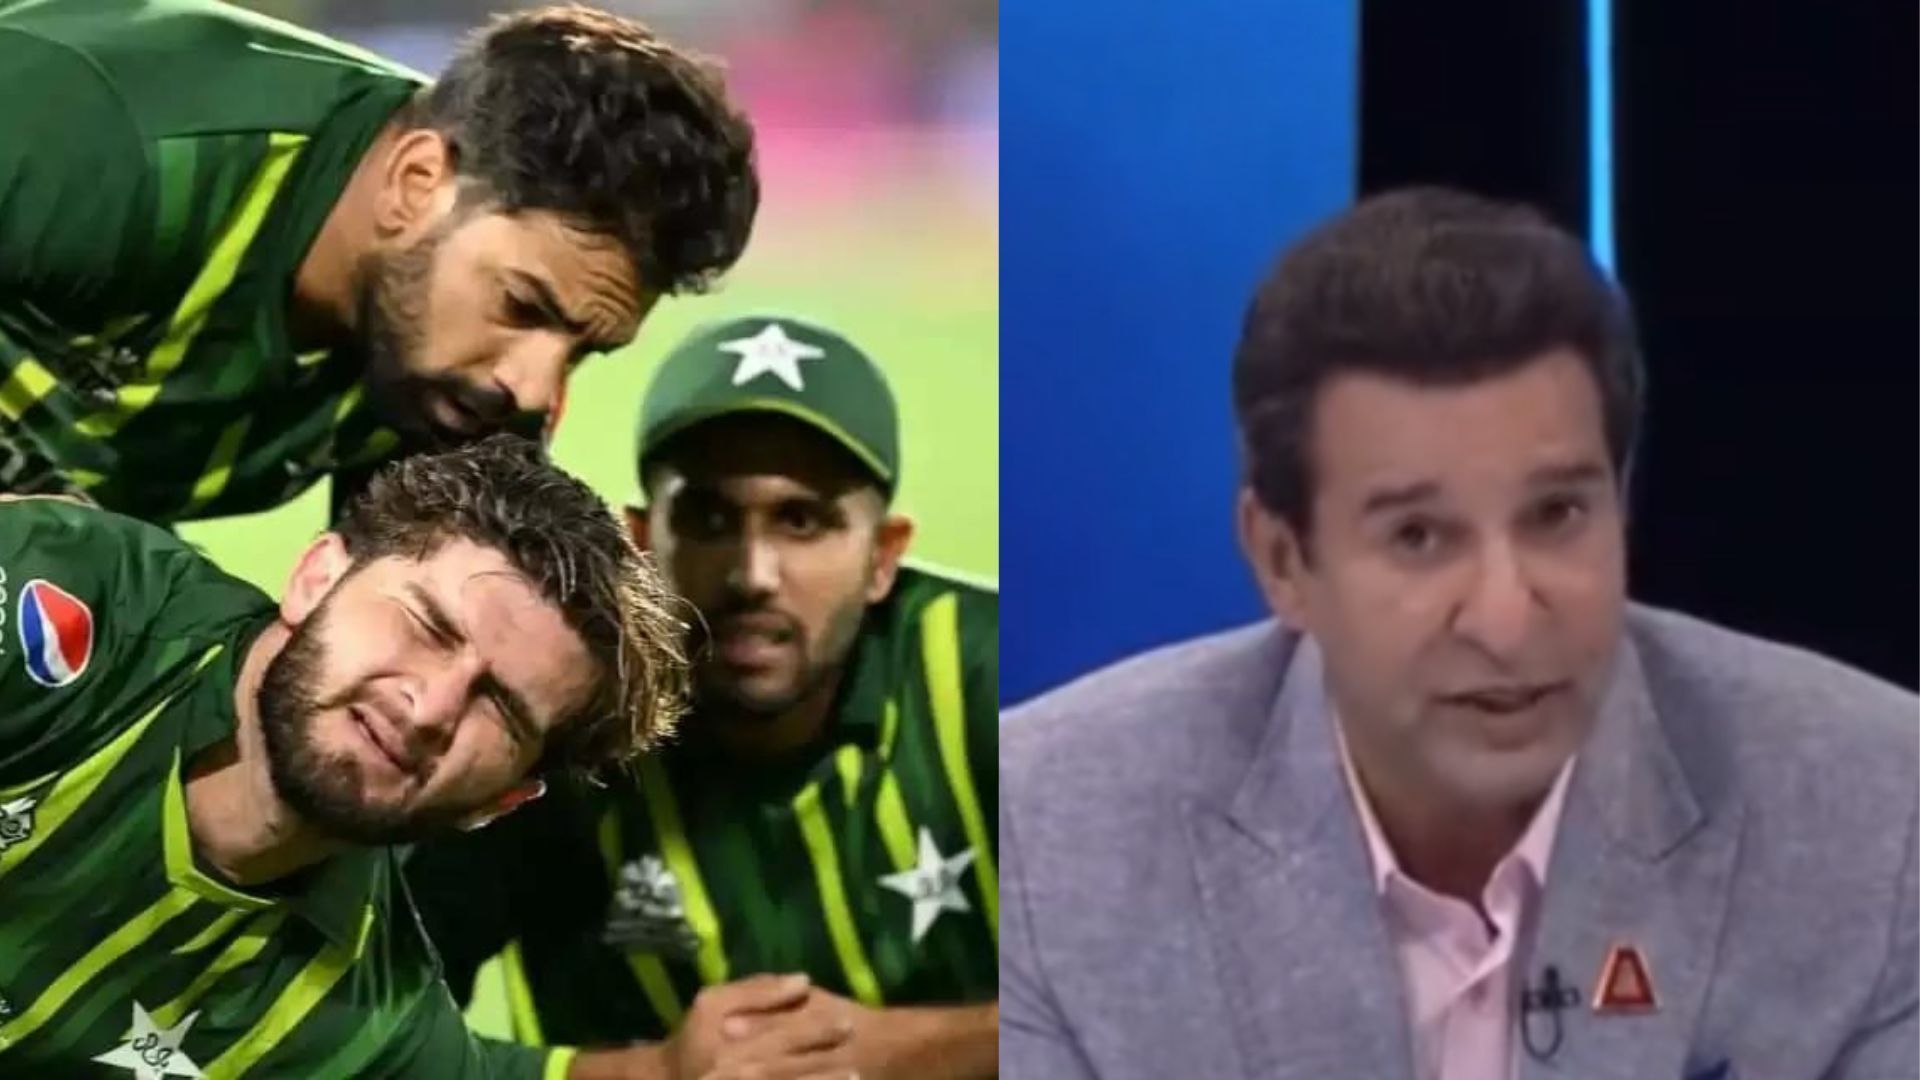 Wasim Akram (R) warned the fan to stop speaking rubbish about his own players. (P.C.:Twitter)